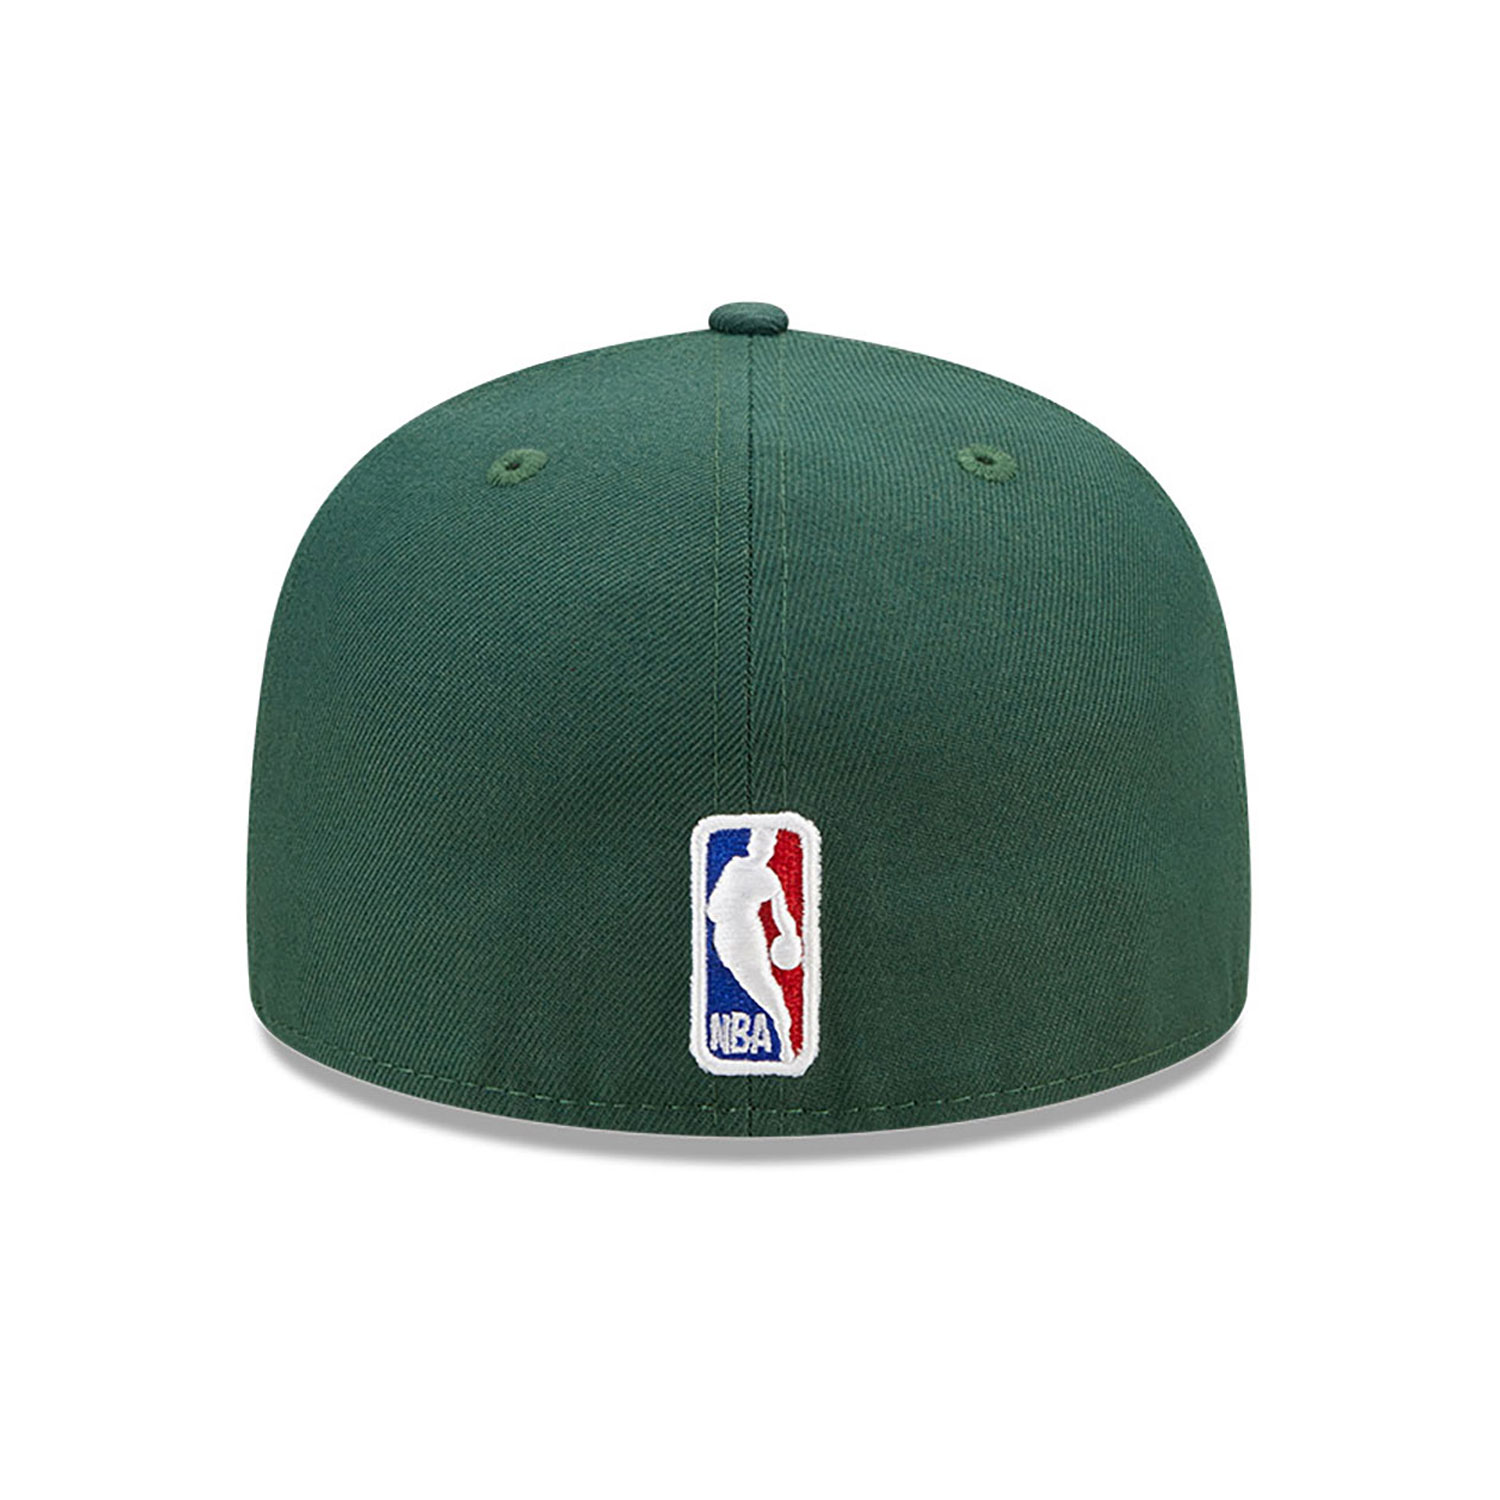 Boston Celtics Authentics City Edition Green 59FIFTY Fitted Cap